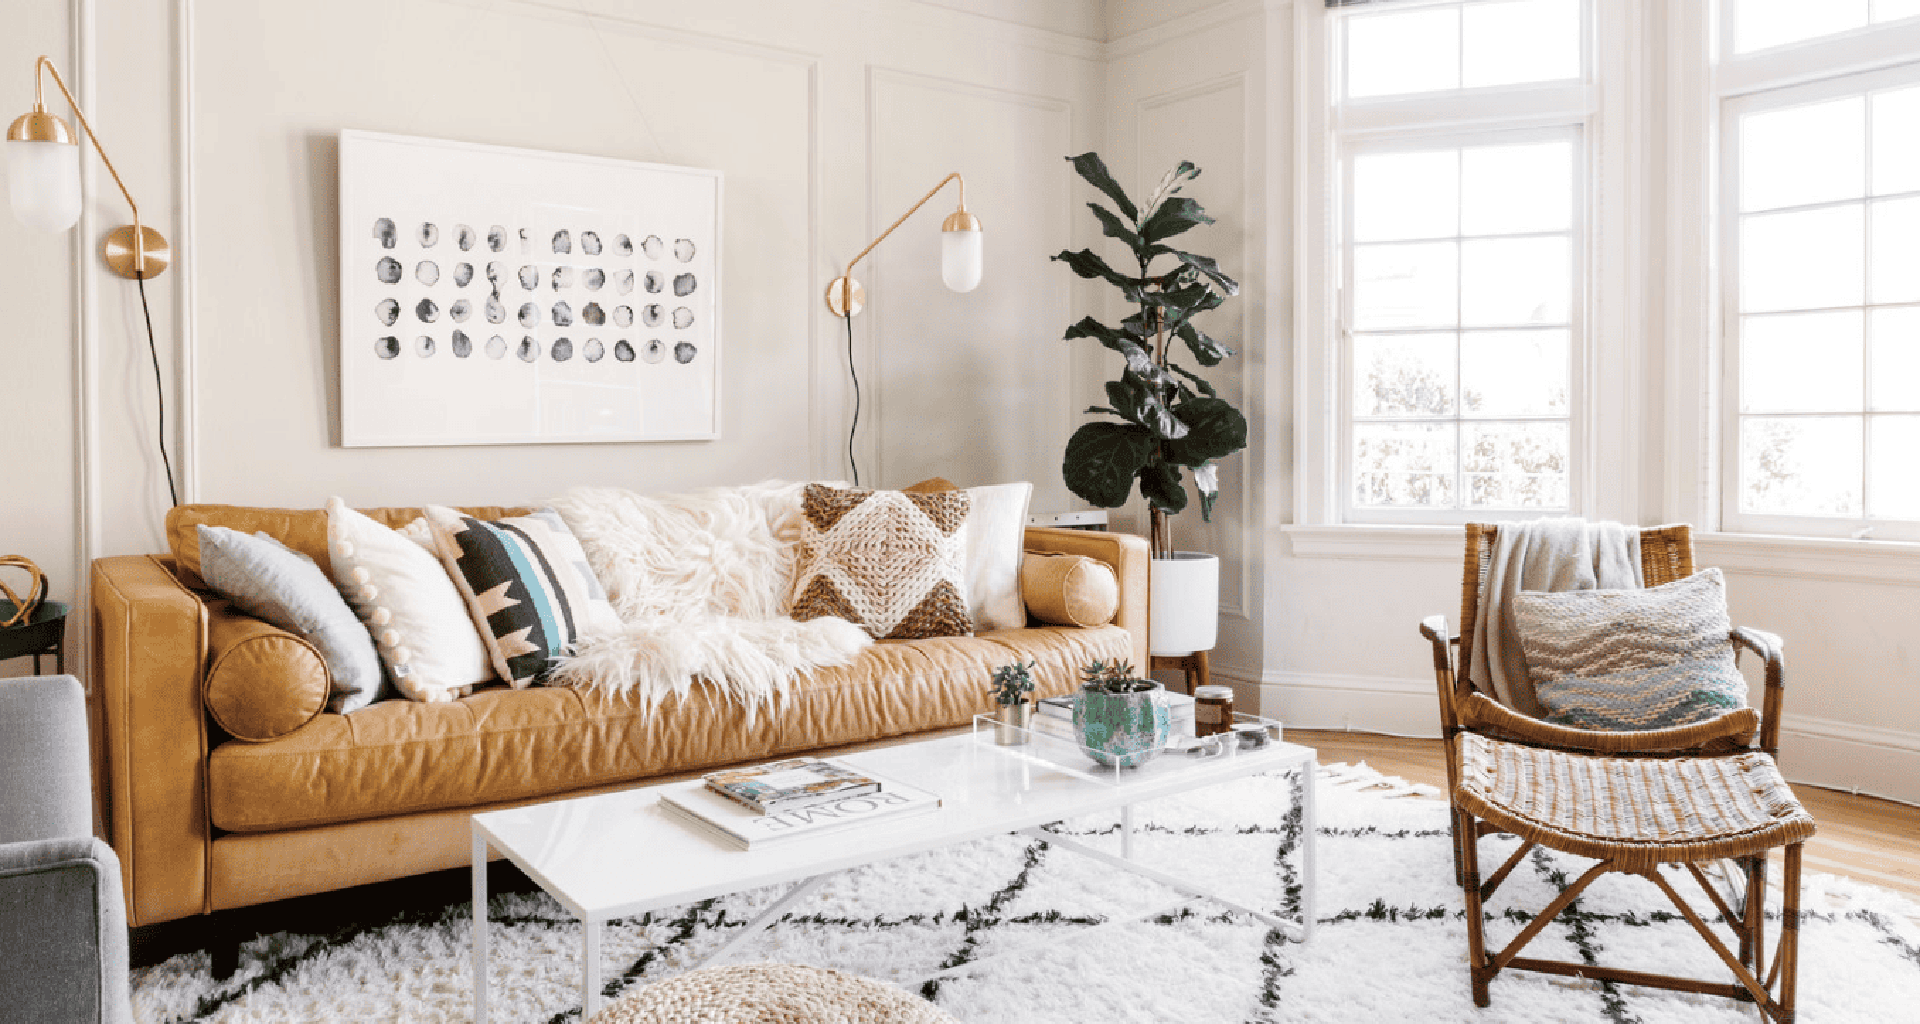 Living Room Rug Ideas: Weaving Comfort and Style Together - Decorilla  Online Interior Design